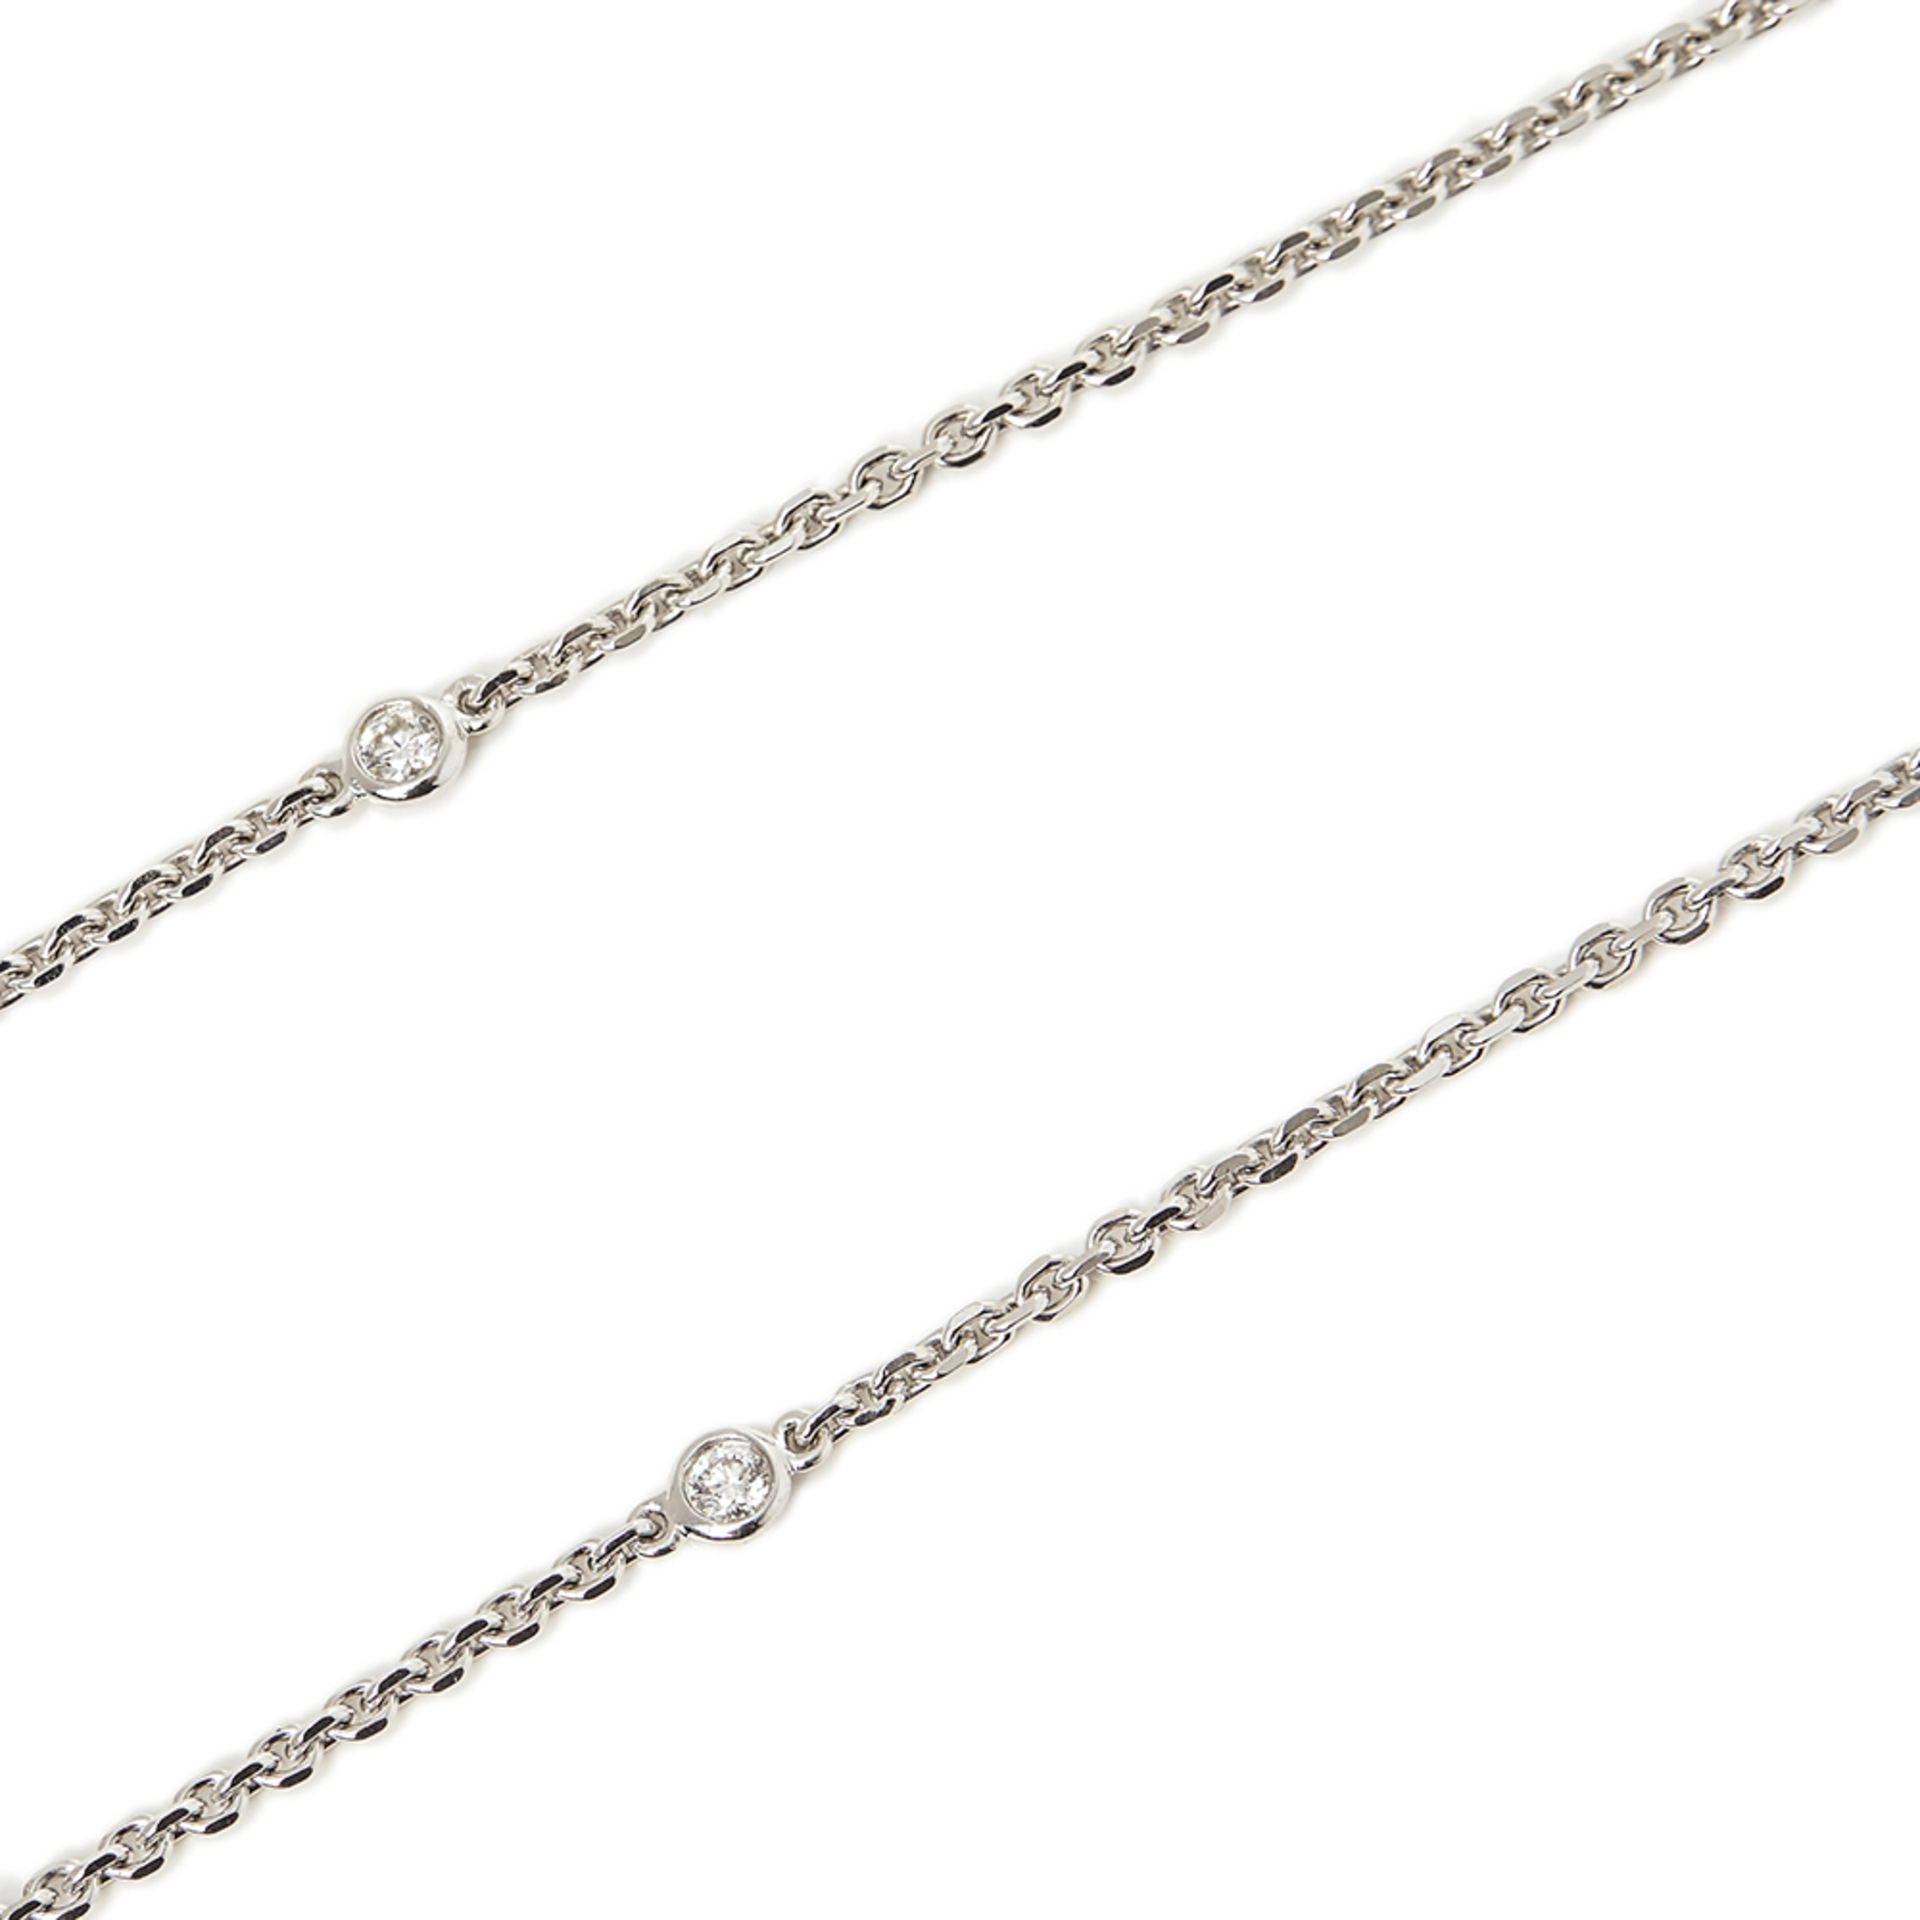 Boodles 18k White Gold Diamond Blossom Necklace - Image 5 of 10